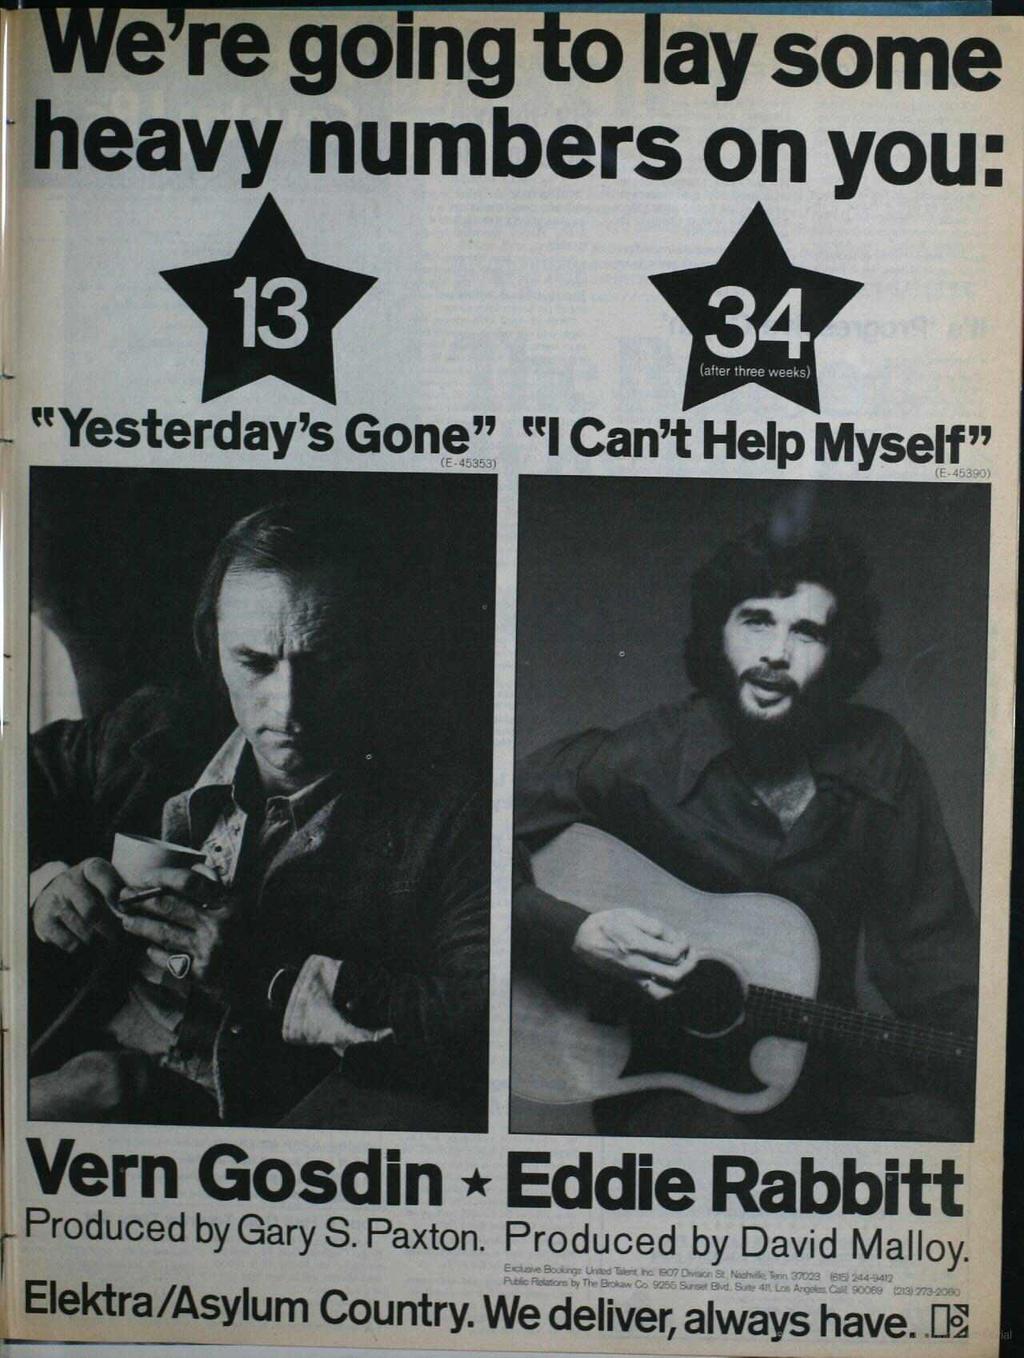 were going to iay some heavy numbers on you: 4 (after three weeks) "Yesterday's Gone, ", " Can't Help Myself" Vern Gosdin * Eddie Rabbitt Produced